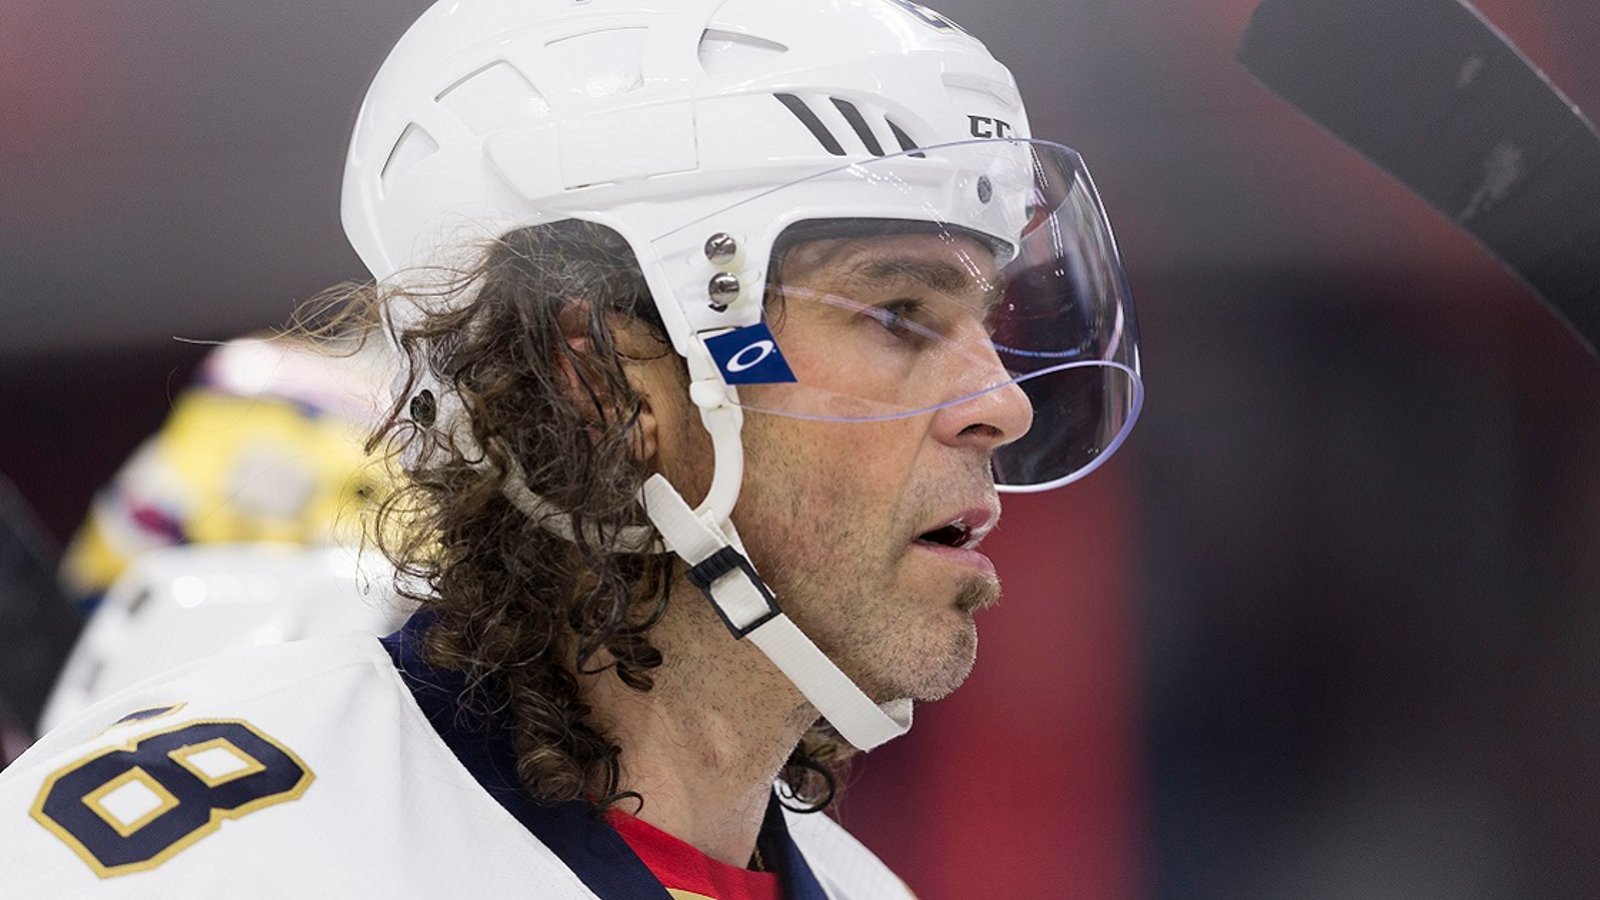 Very disappointing update from Jaromir Jagr on Tuesday.